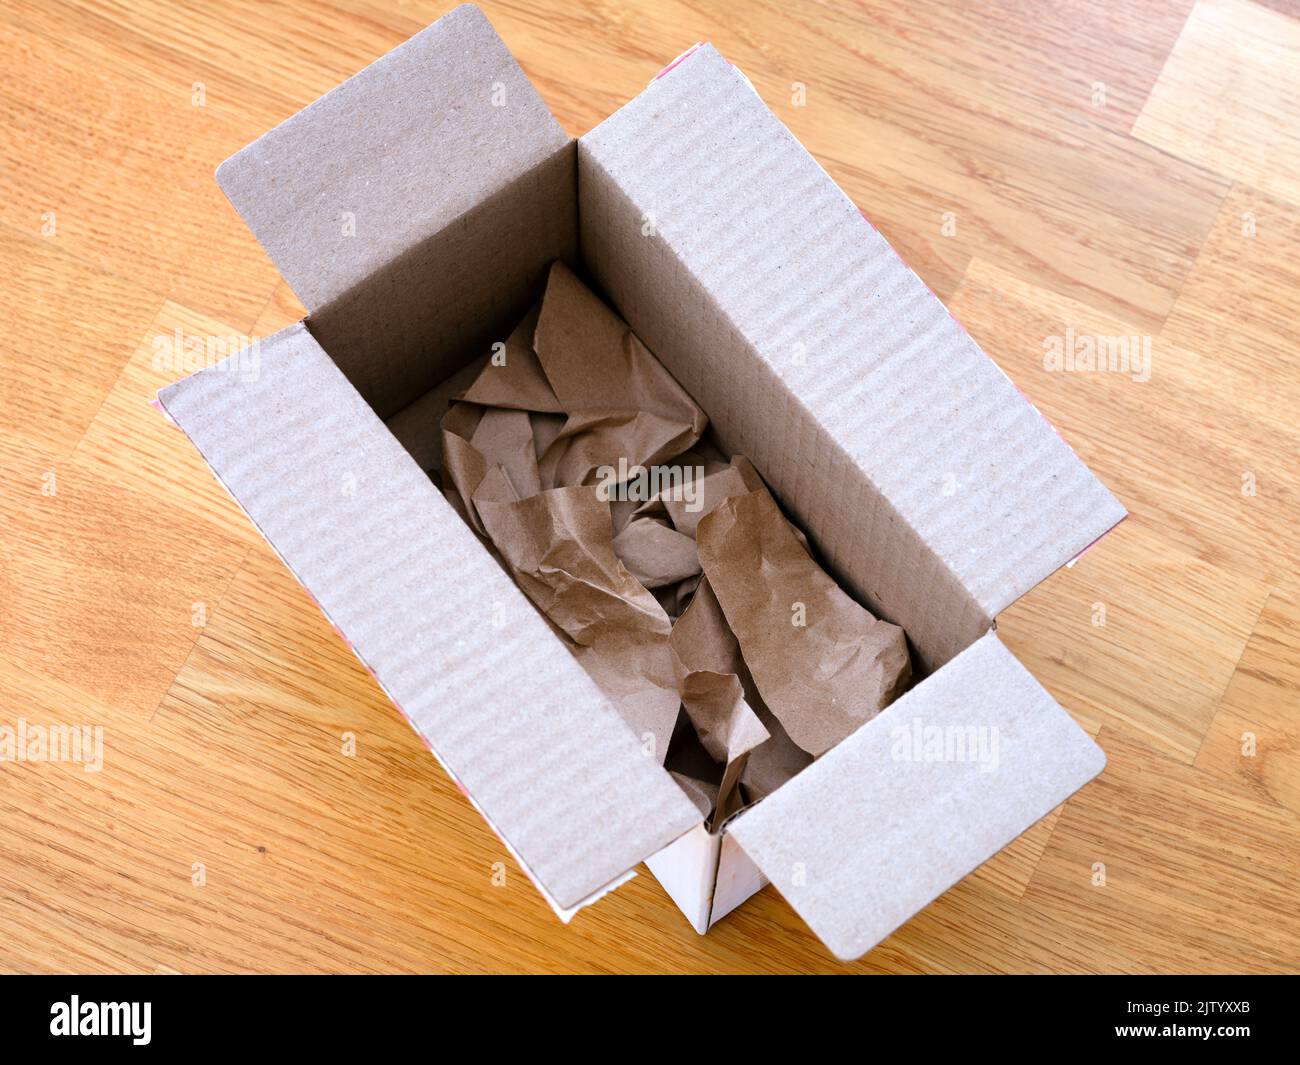 A cardboard box with paper inside on a parquet floor Stock Photo